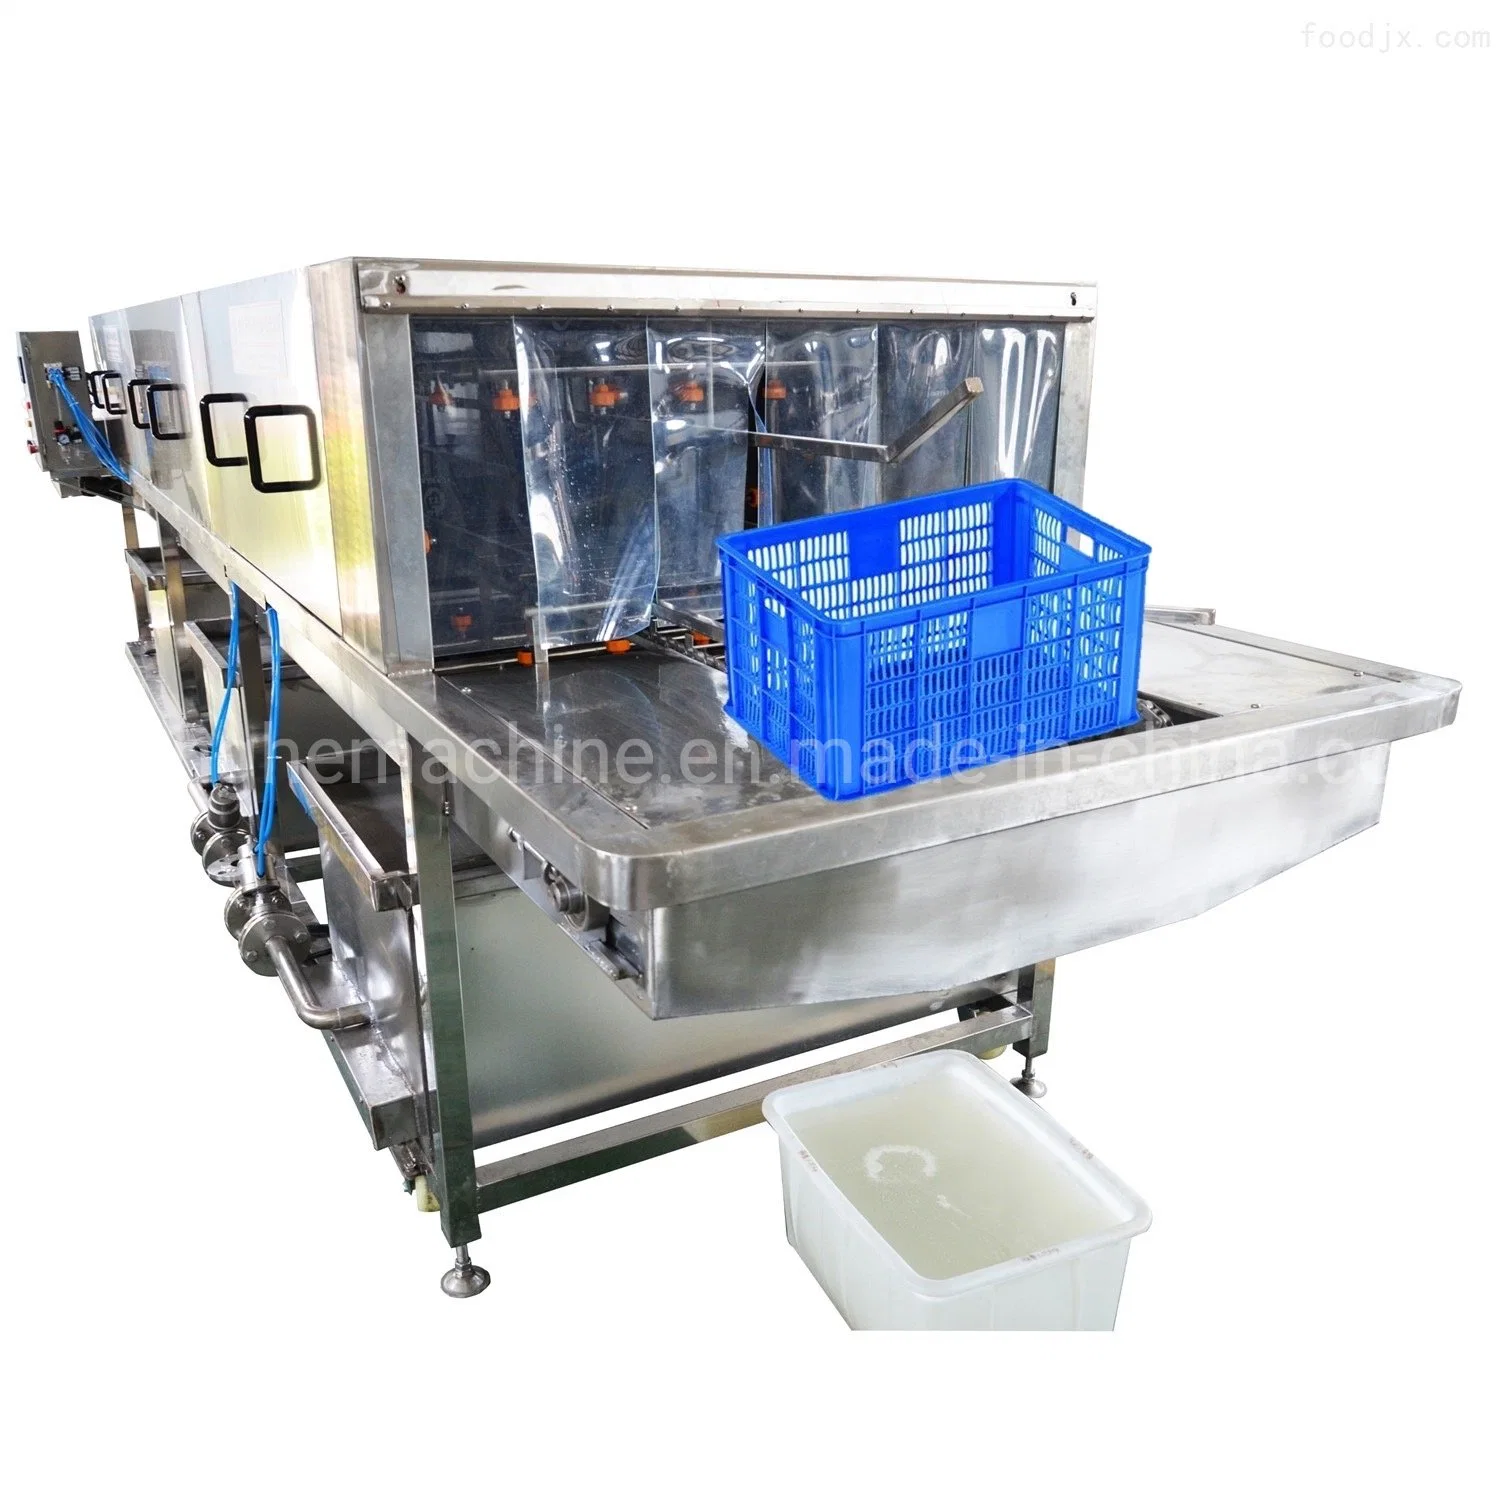 Meal Box Cleaning Machine Industry Plastic Basket Washer Crate Washer Machine